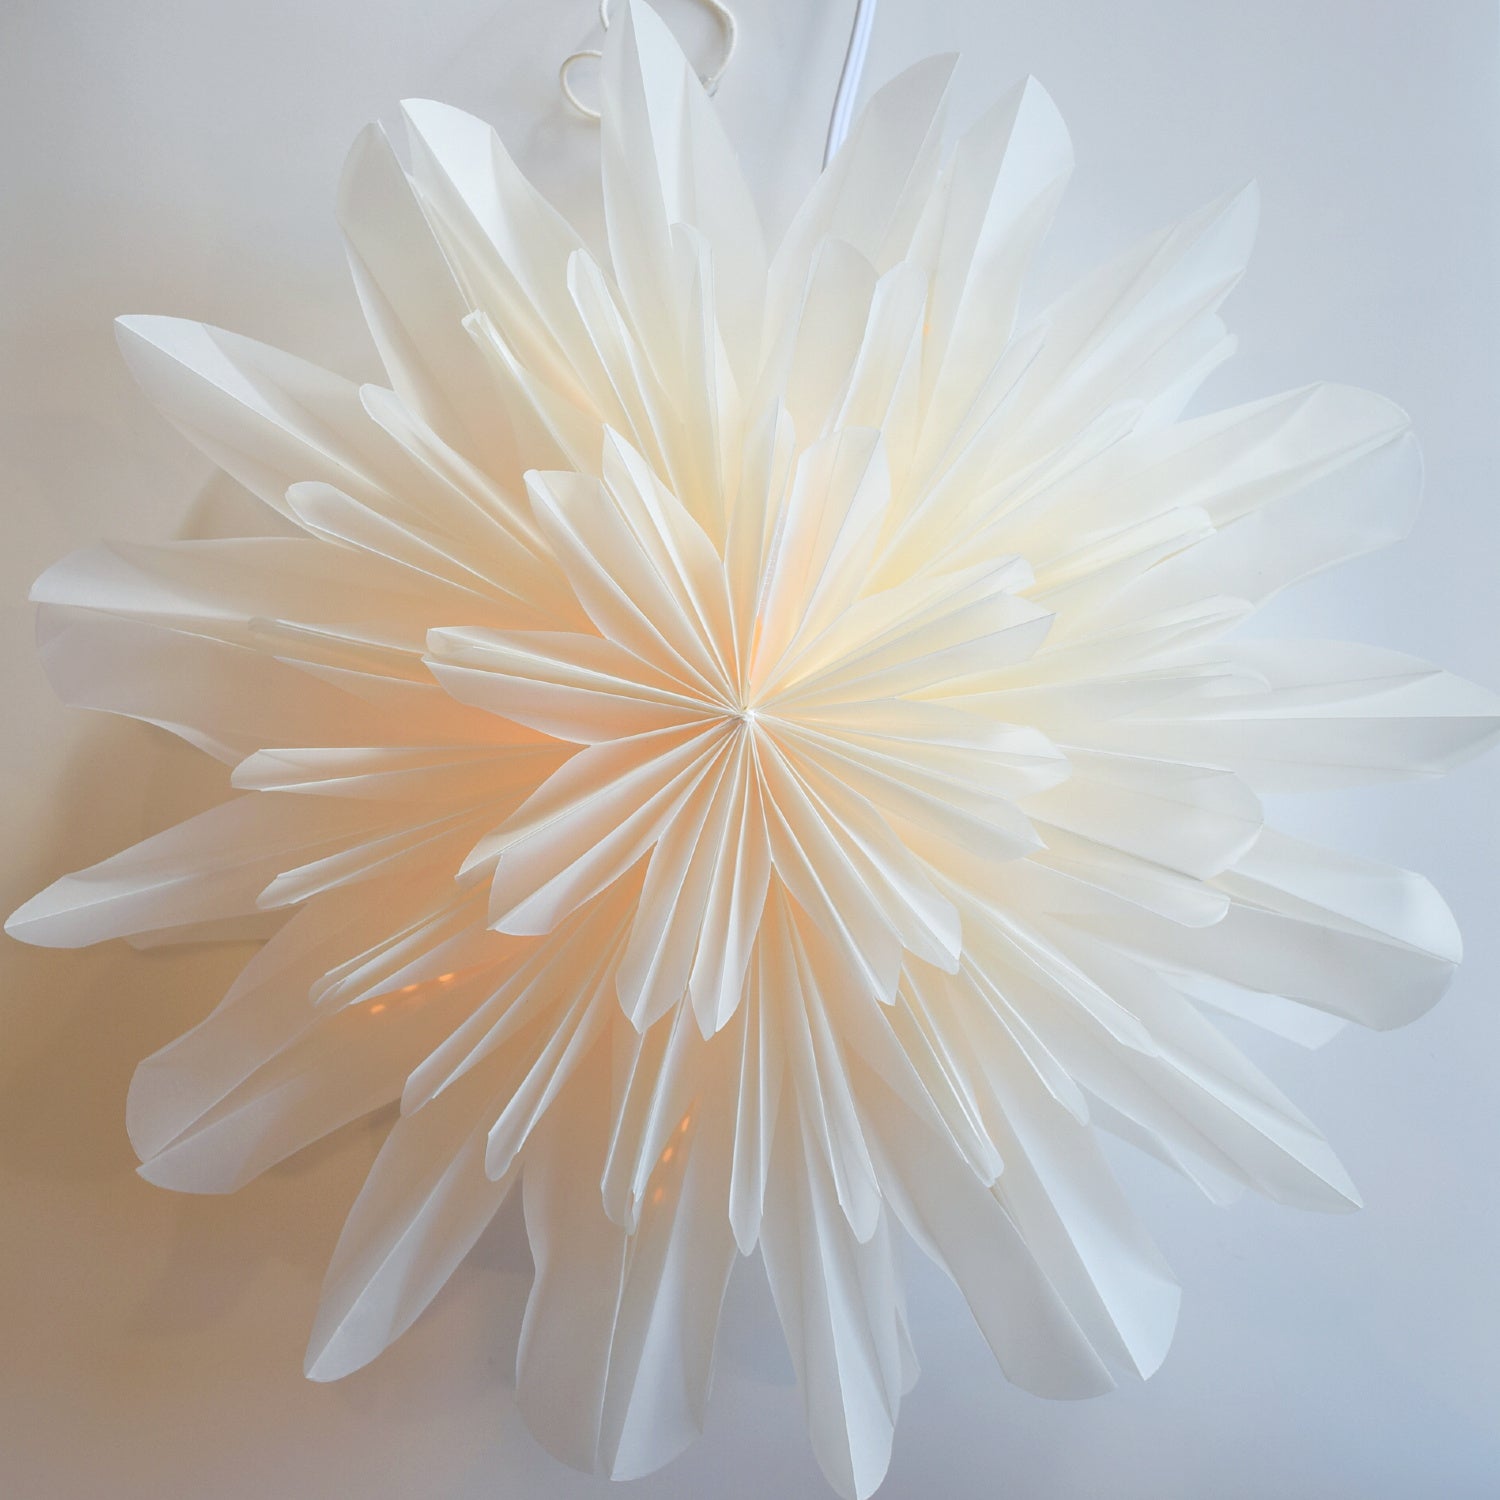 32" White Snowfall Snowflake Star Lantern Pizzelle Design - Great With or Without Lights - Ideal for Holiday and Snowflake Decorations, Weddings, Parties, and Home Decor